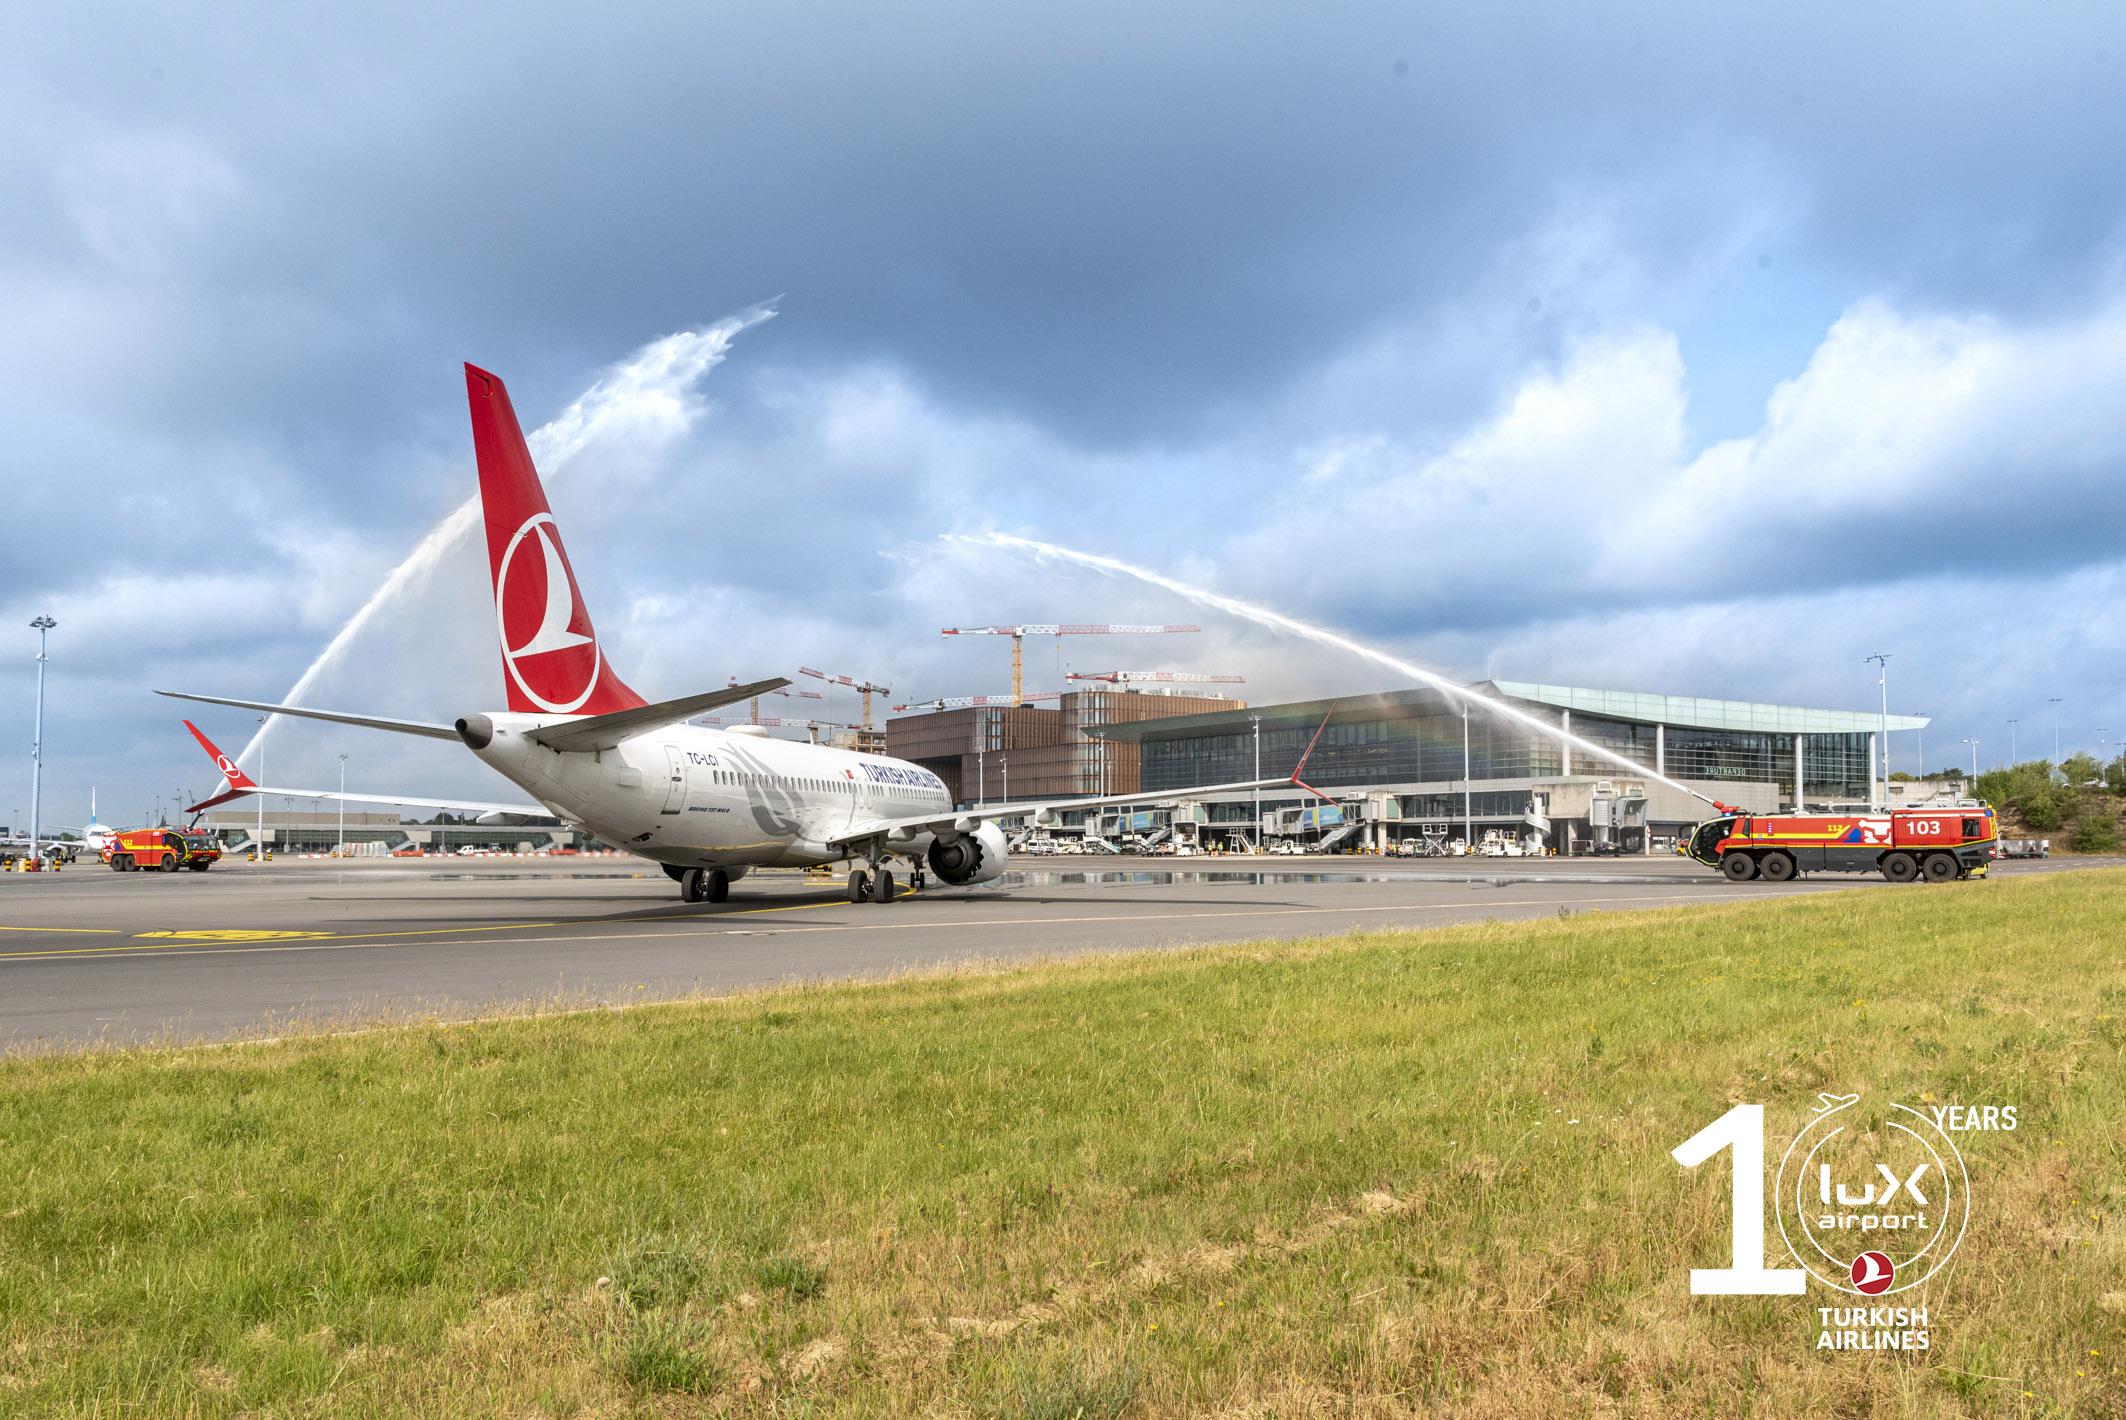 Lux-Airport Celebrates 10 Years With Turkish Airlines